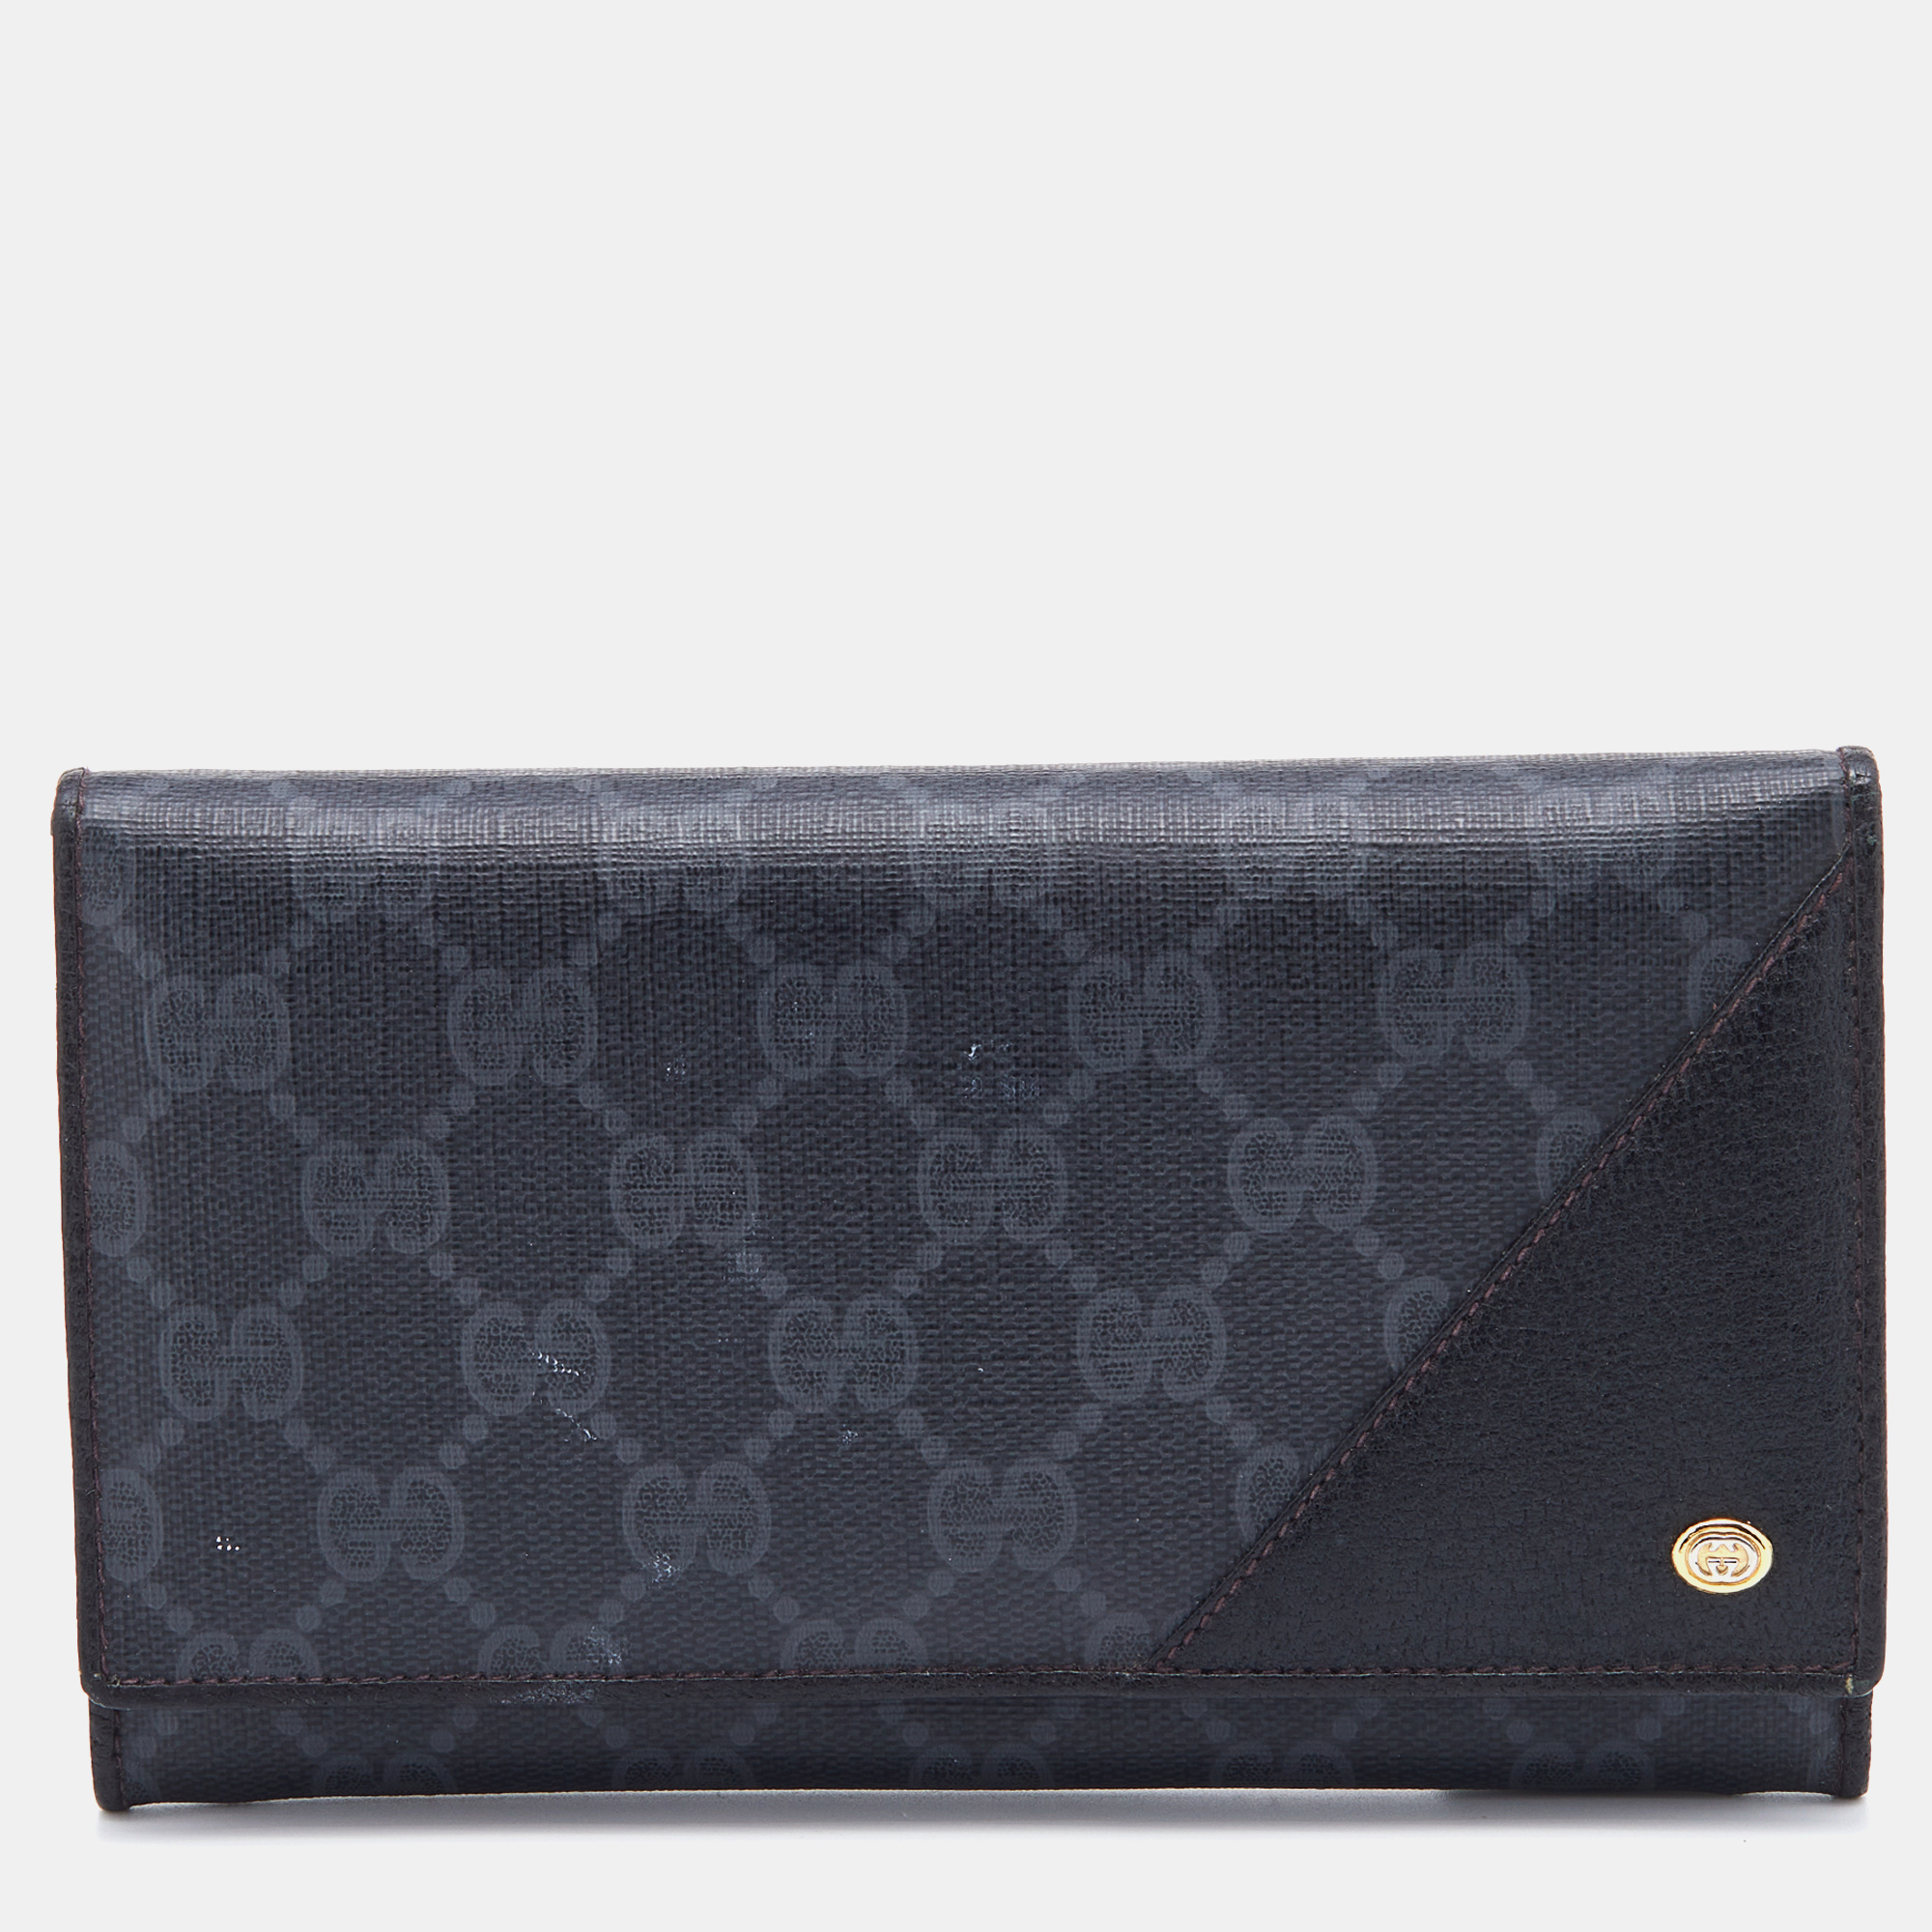 

Gucci Black GG Supreme Canvas and Leather Flap Continental Wallet